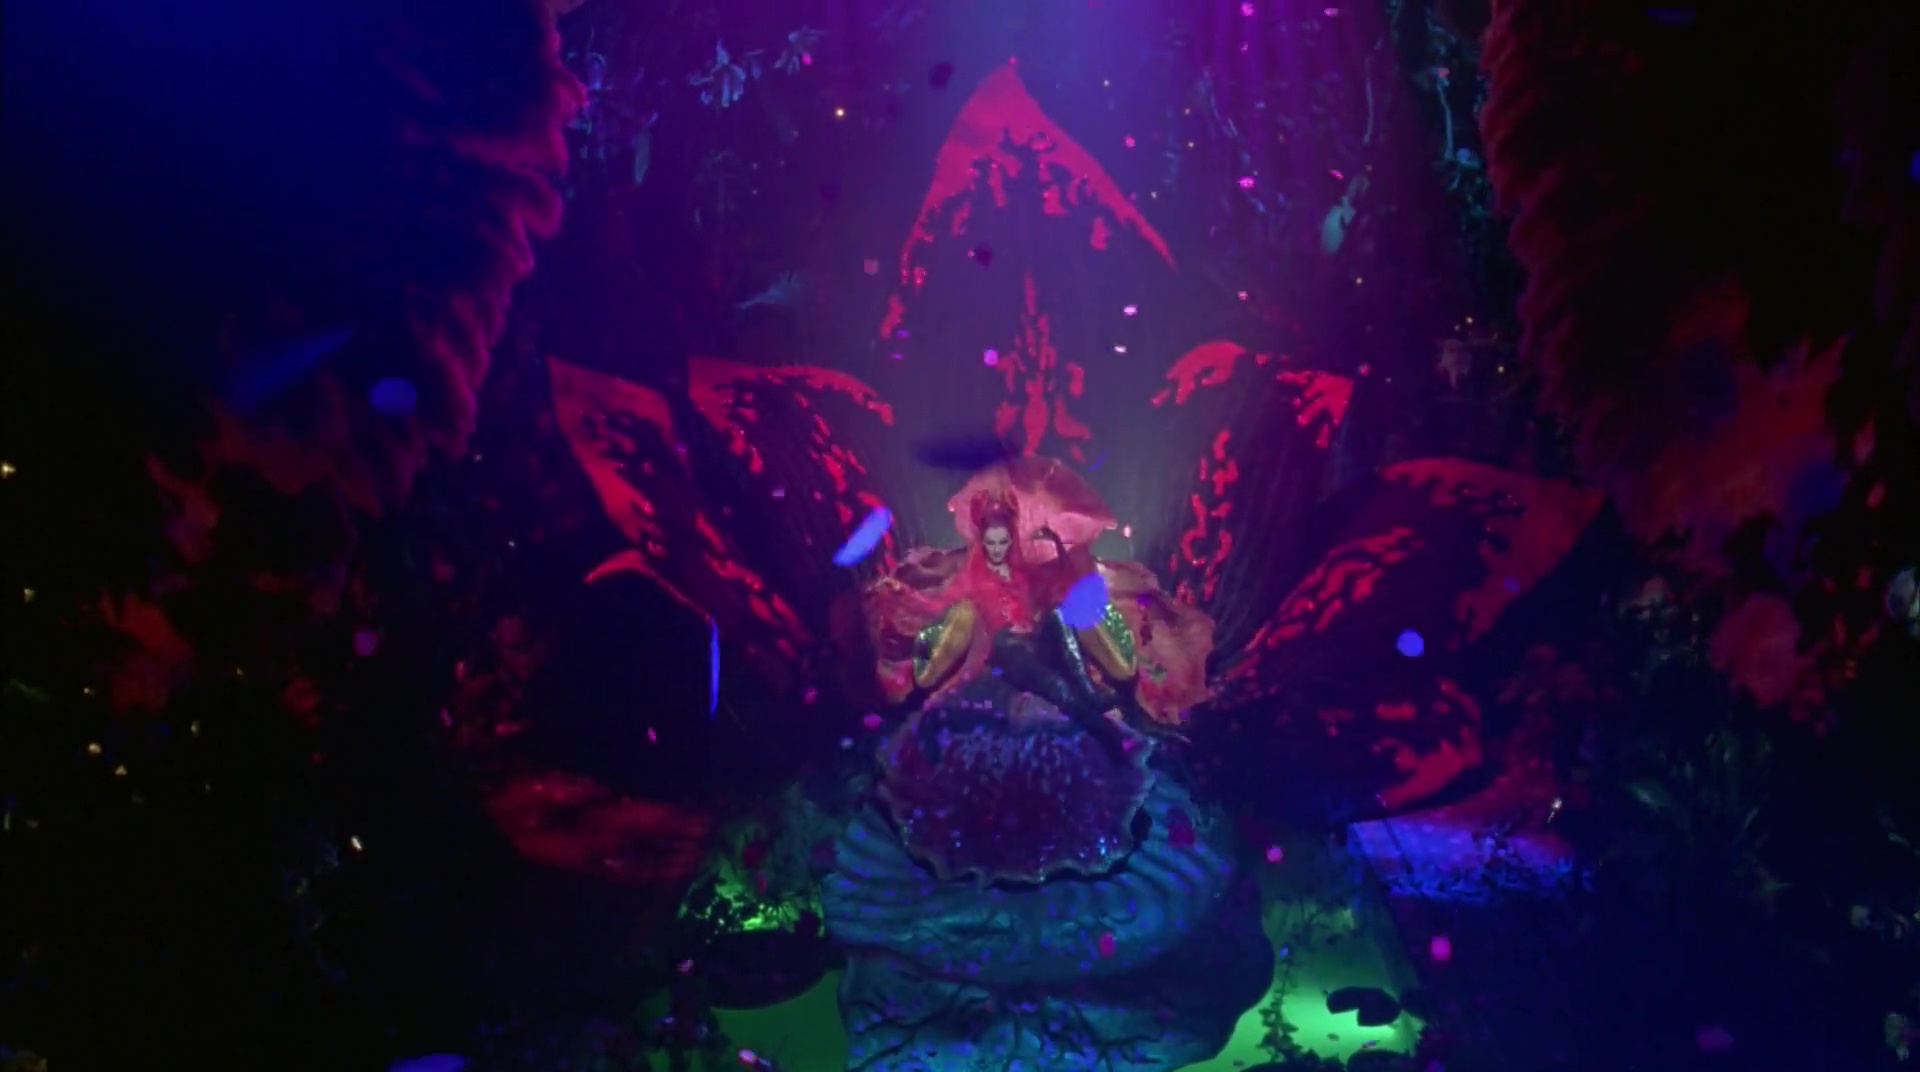 Image from'Batman Robin' 1997 Poison Ivy Uma Thurman in her lair at